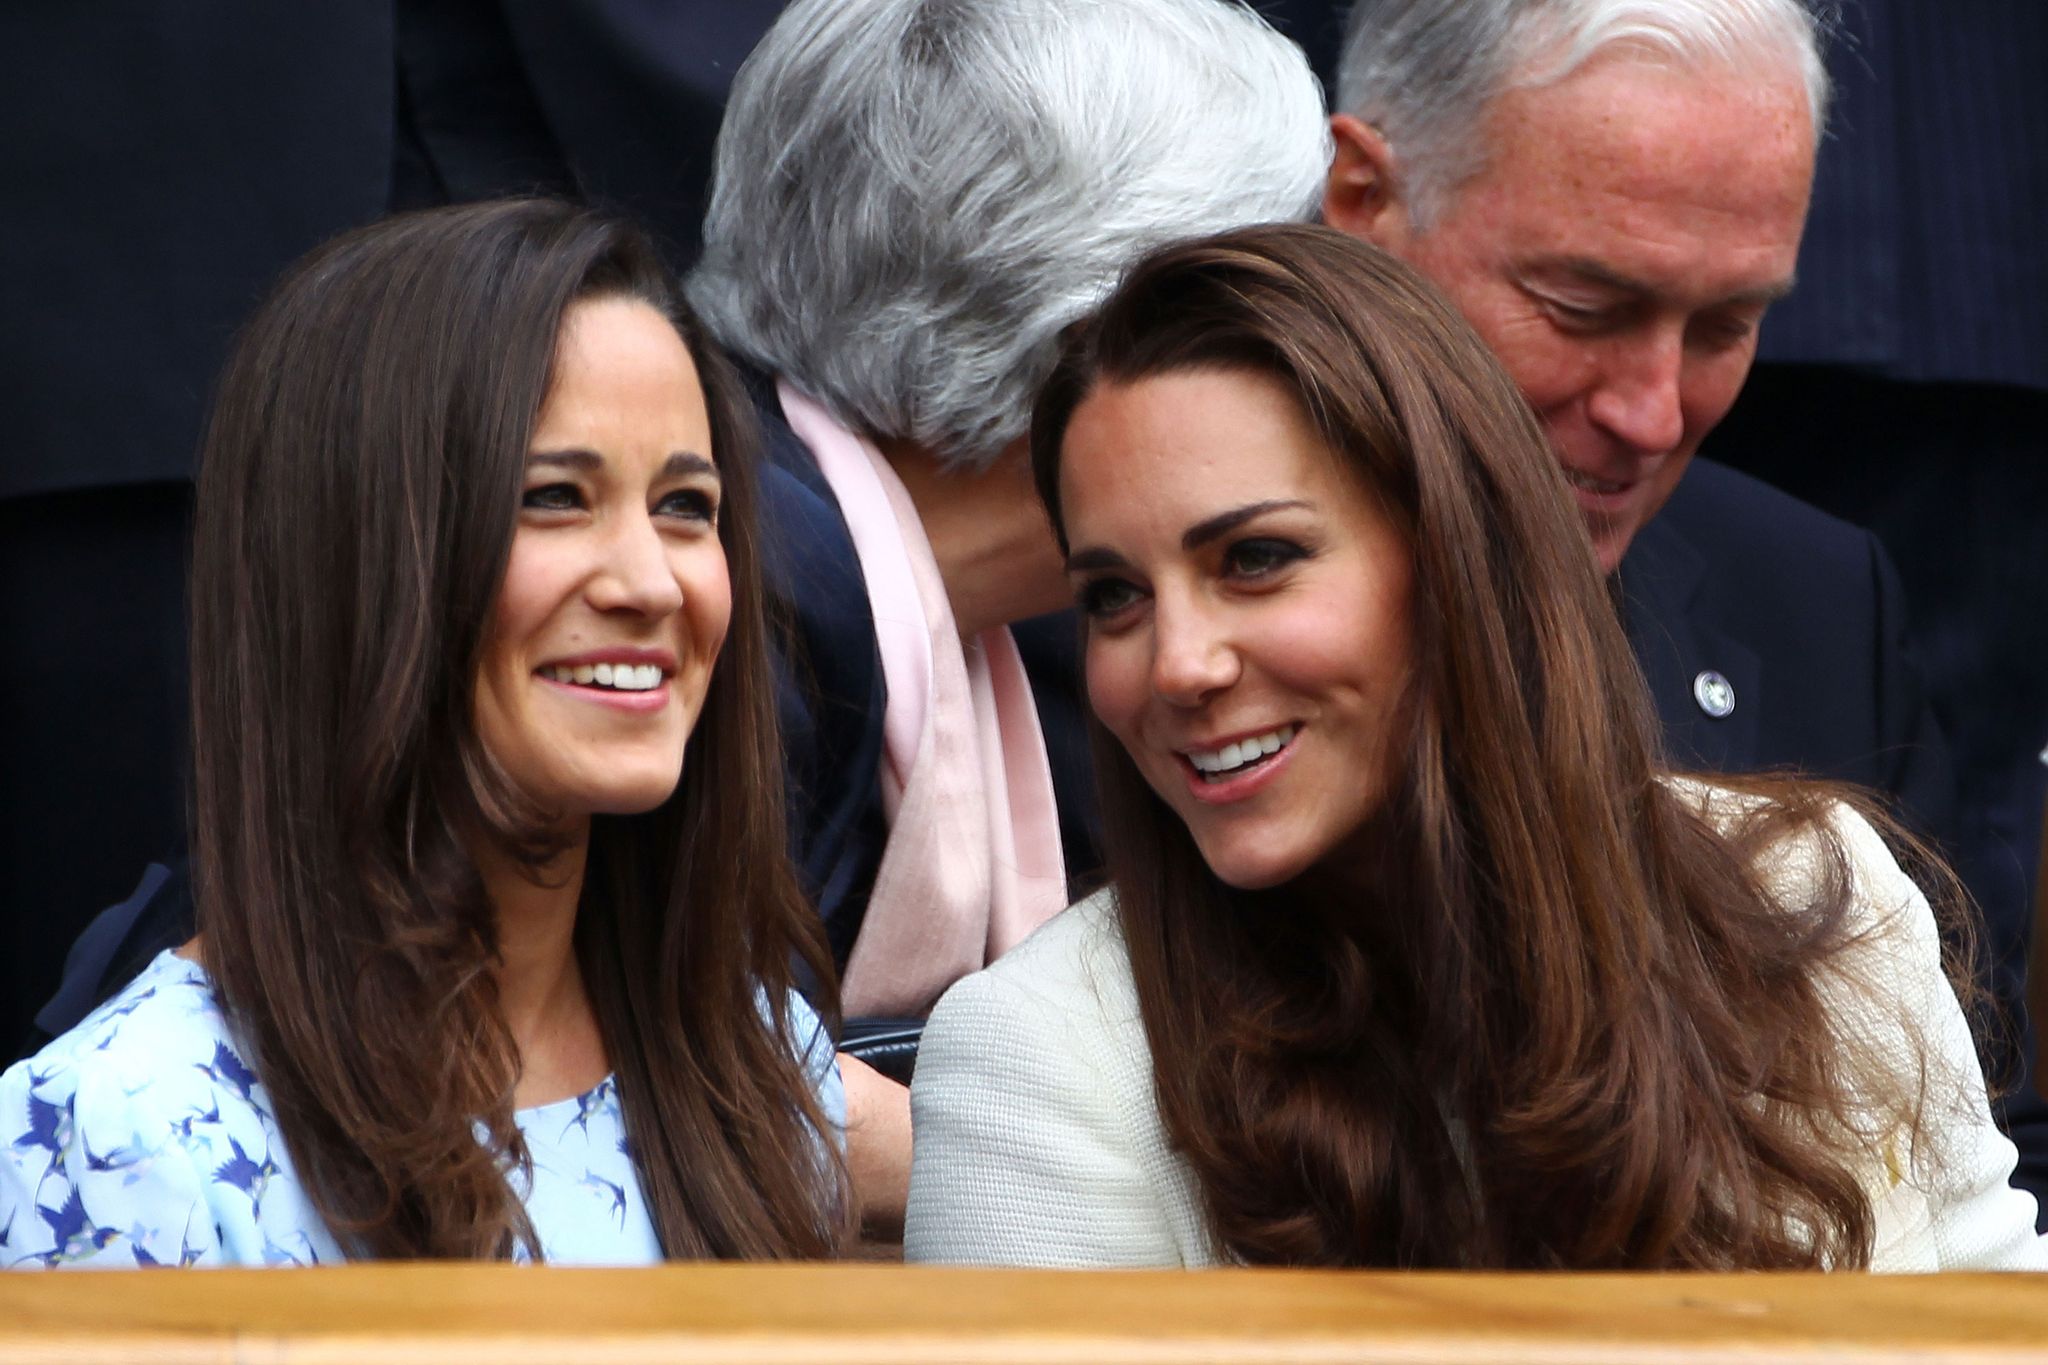 the duchess of cambridge and pippa middleton